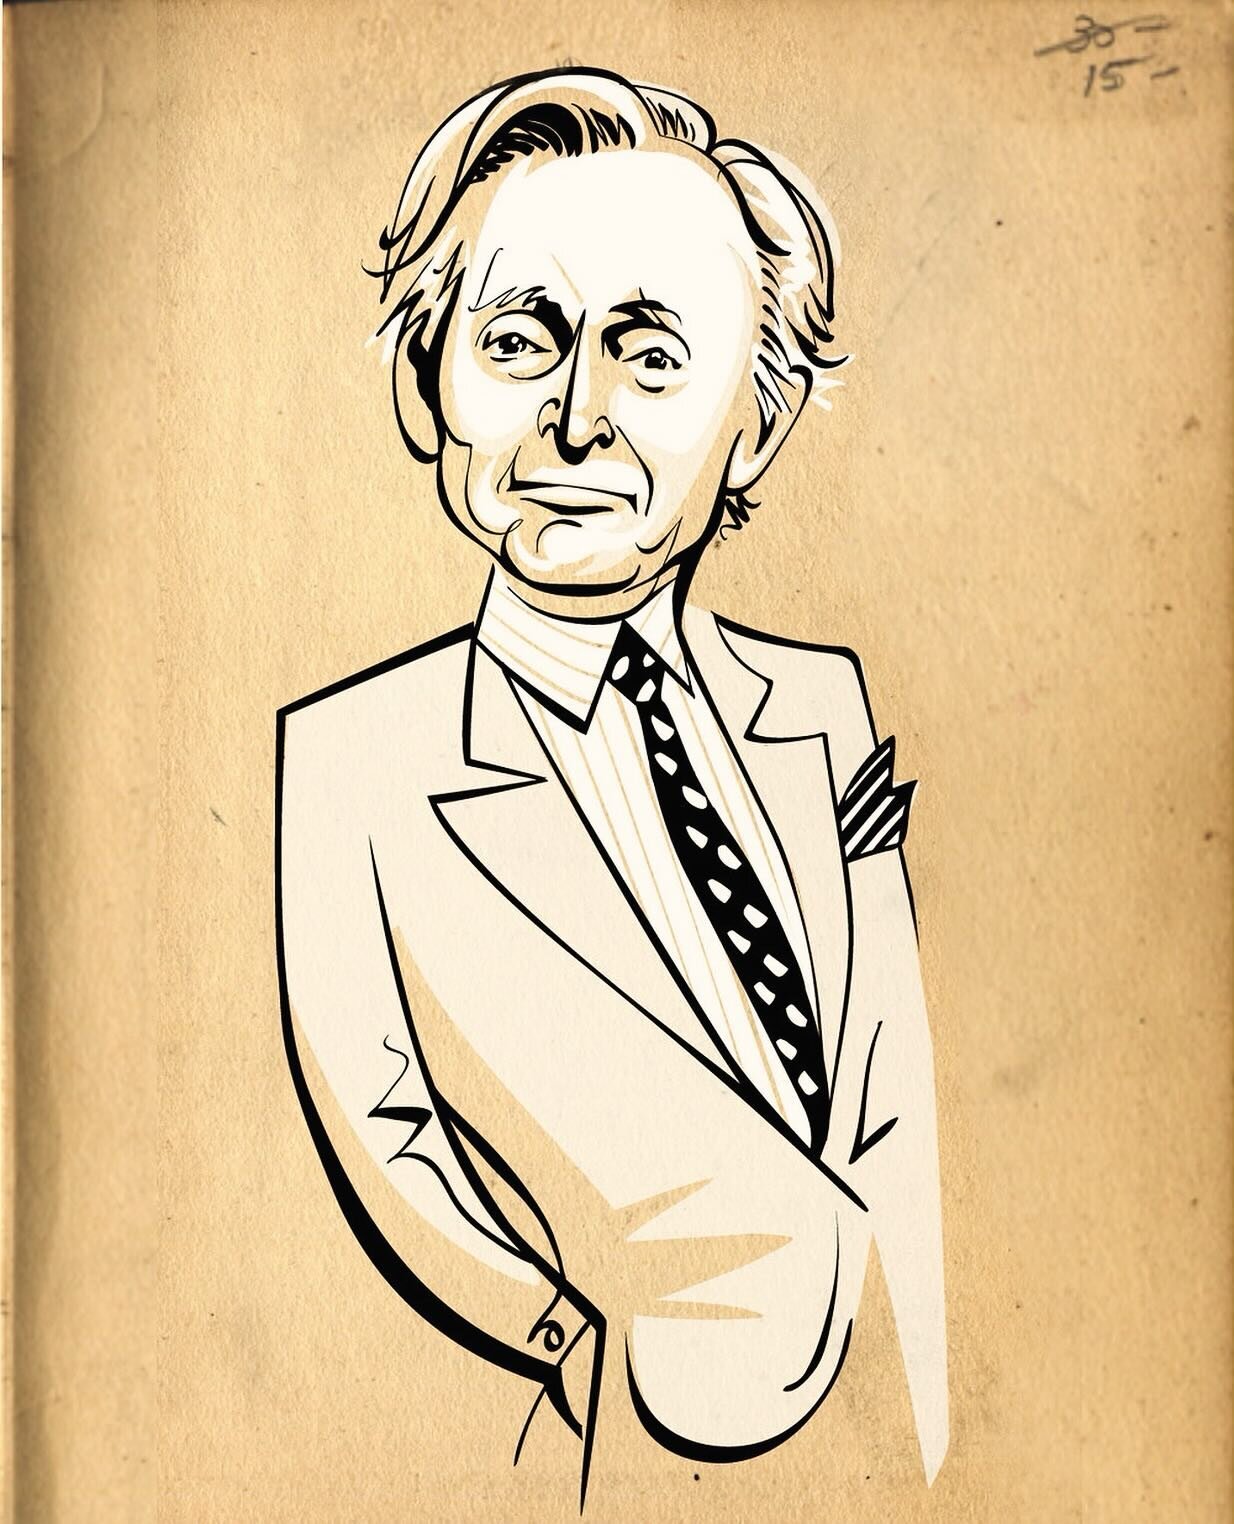 Hey it was Tom Wolfe&rsquo;s birthday last week and I forgot to have a bonfire, dang it!

#portraitillustration #illustratedportrait #lineportrait #lineart #lineartwork #blackandwhiteportrait #line #notjuniorsamples